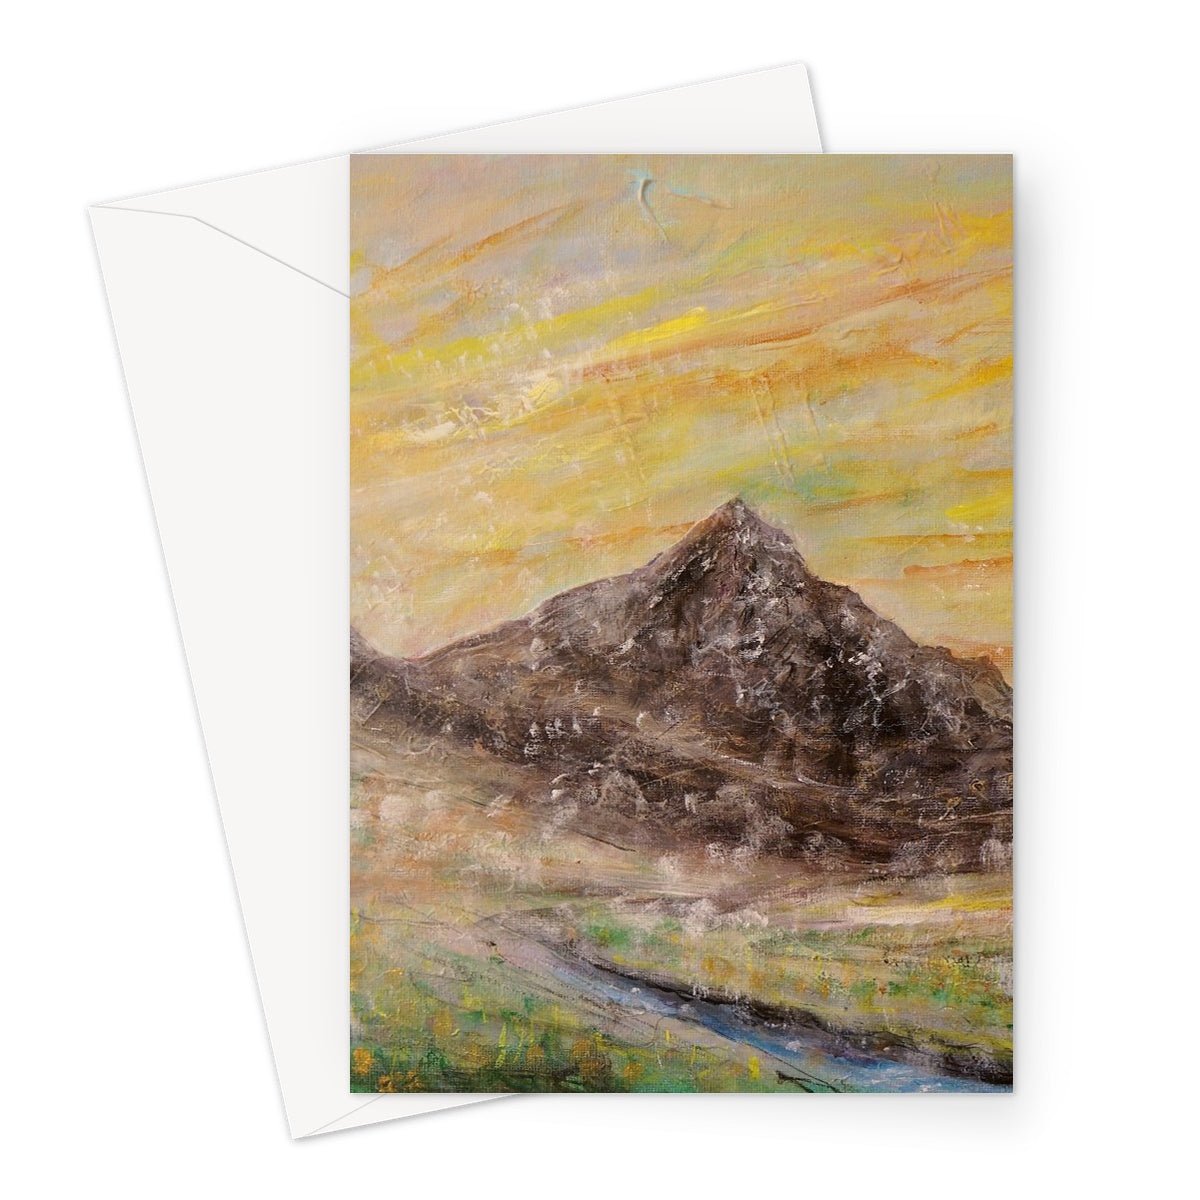 Glen Rosa Mist Arran Art Gifts Greeting Card-Greetings Cards-Arran Art Gallery-A5 Portrait-1 Card-Paintings, Prints, Homeware, Art Gifts From Scotland By Scottish Artist Kevin Hunter